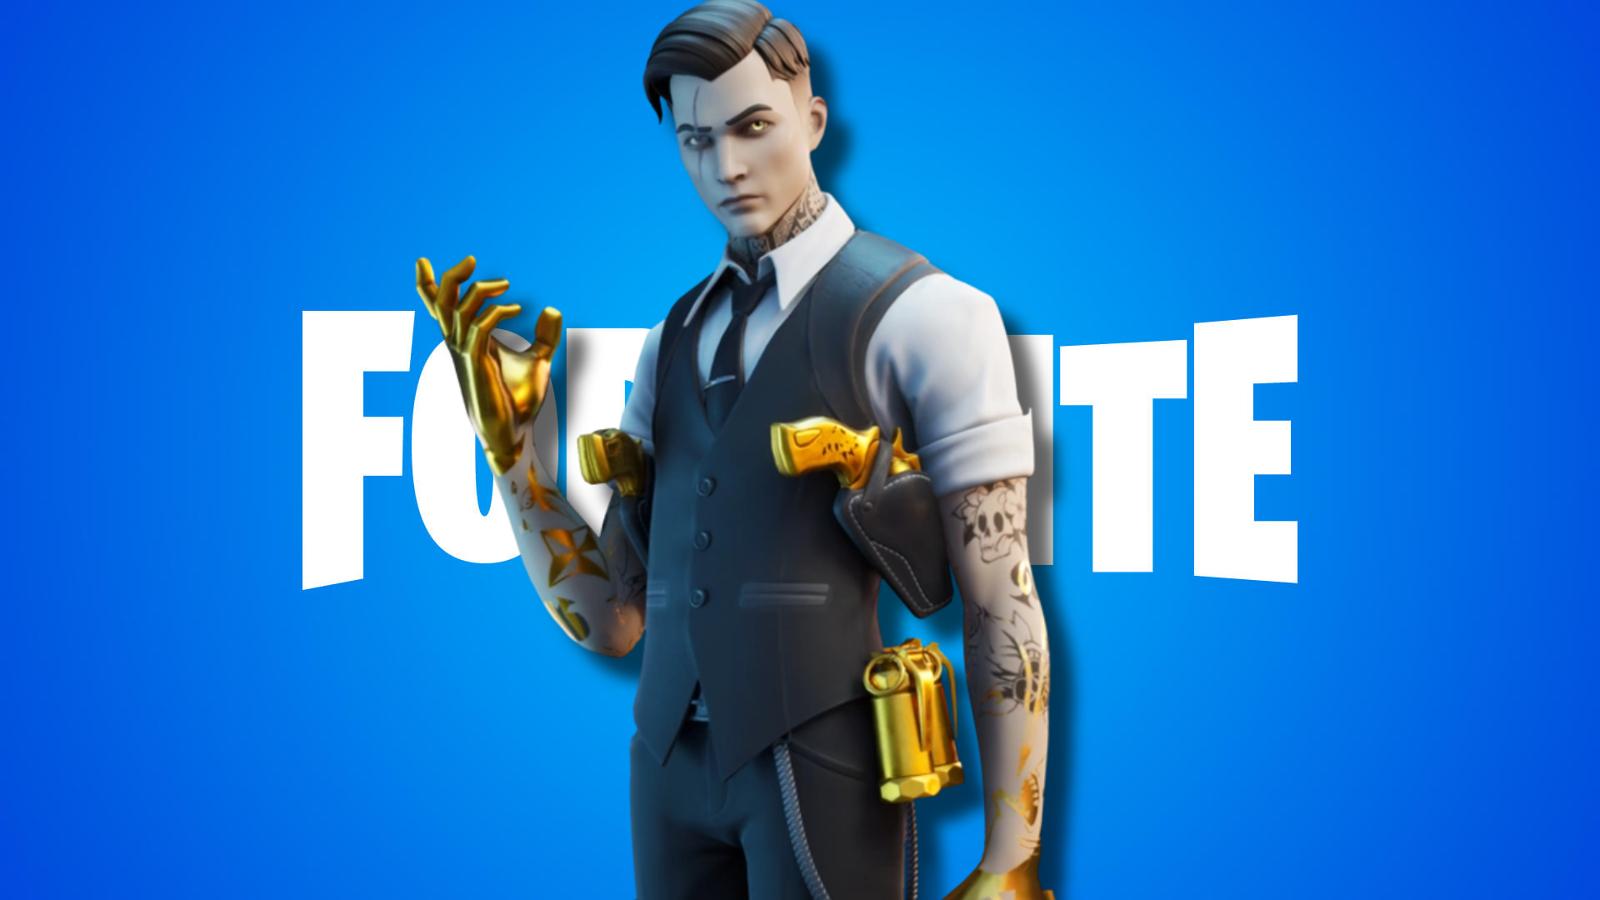 Midas from Fortnite standing over the game's logo.